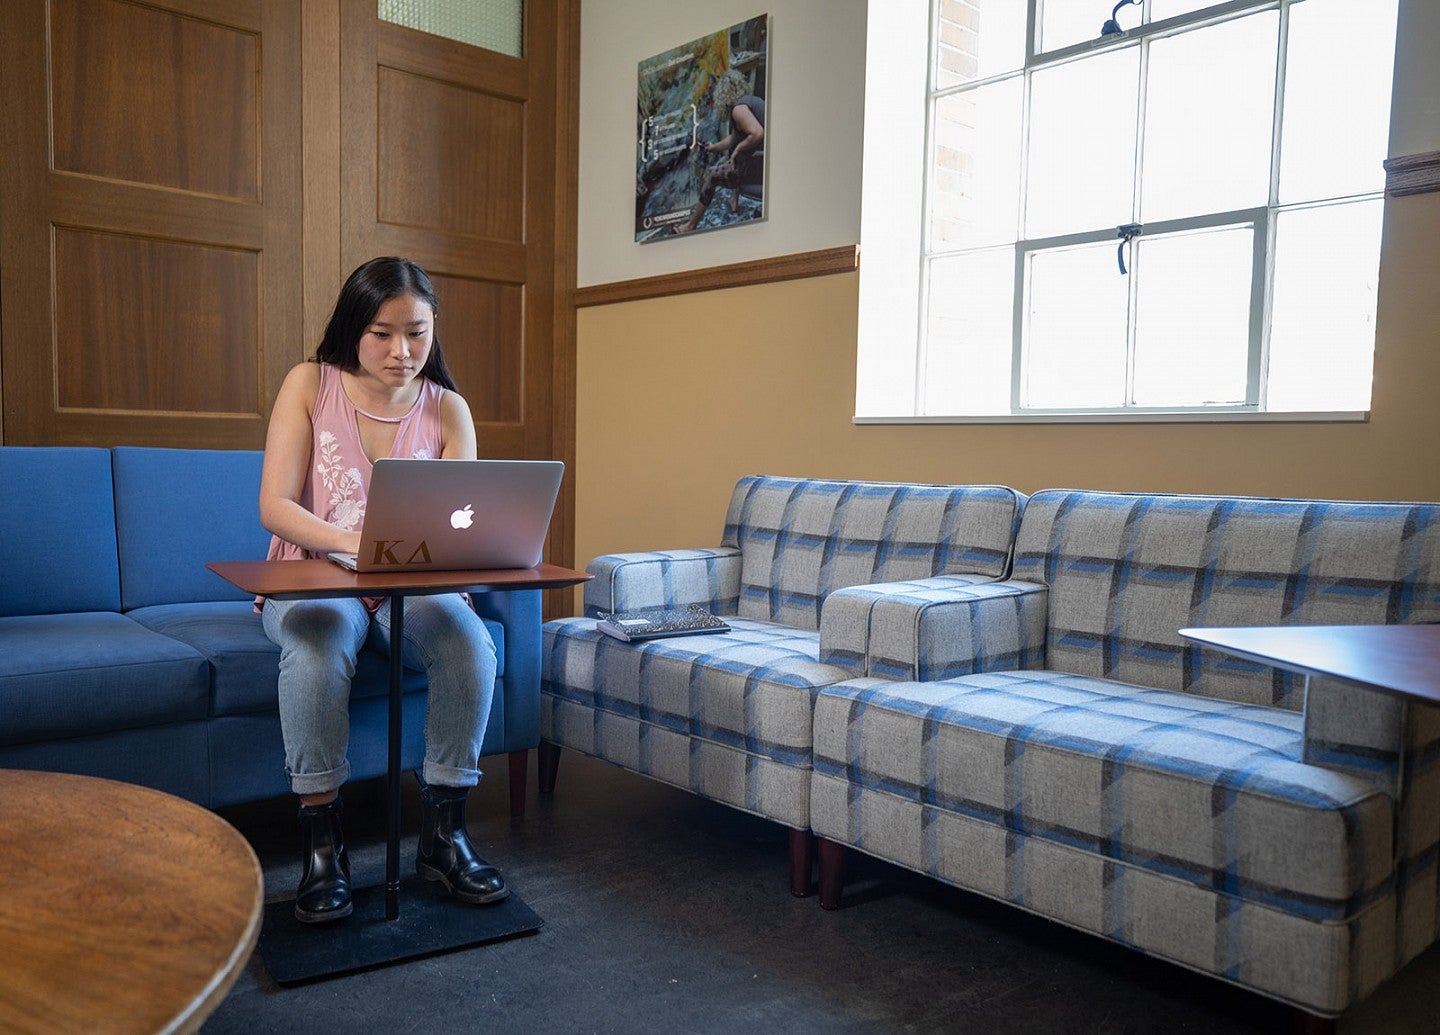 Student sitting in lounge using laptop to study